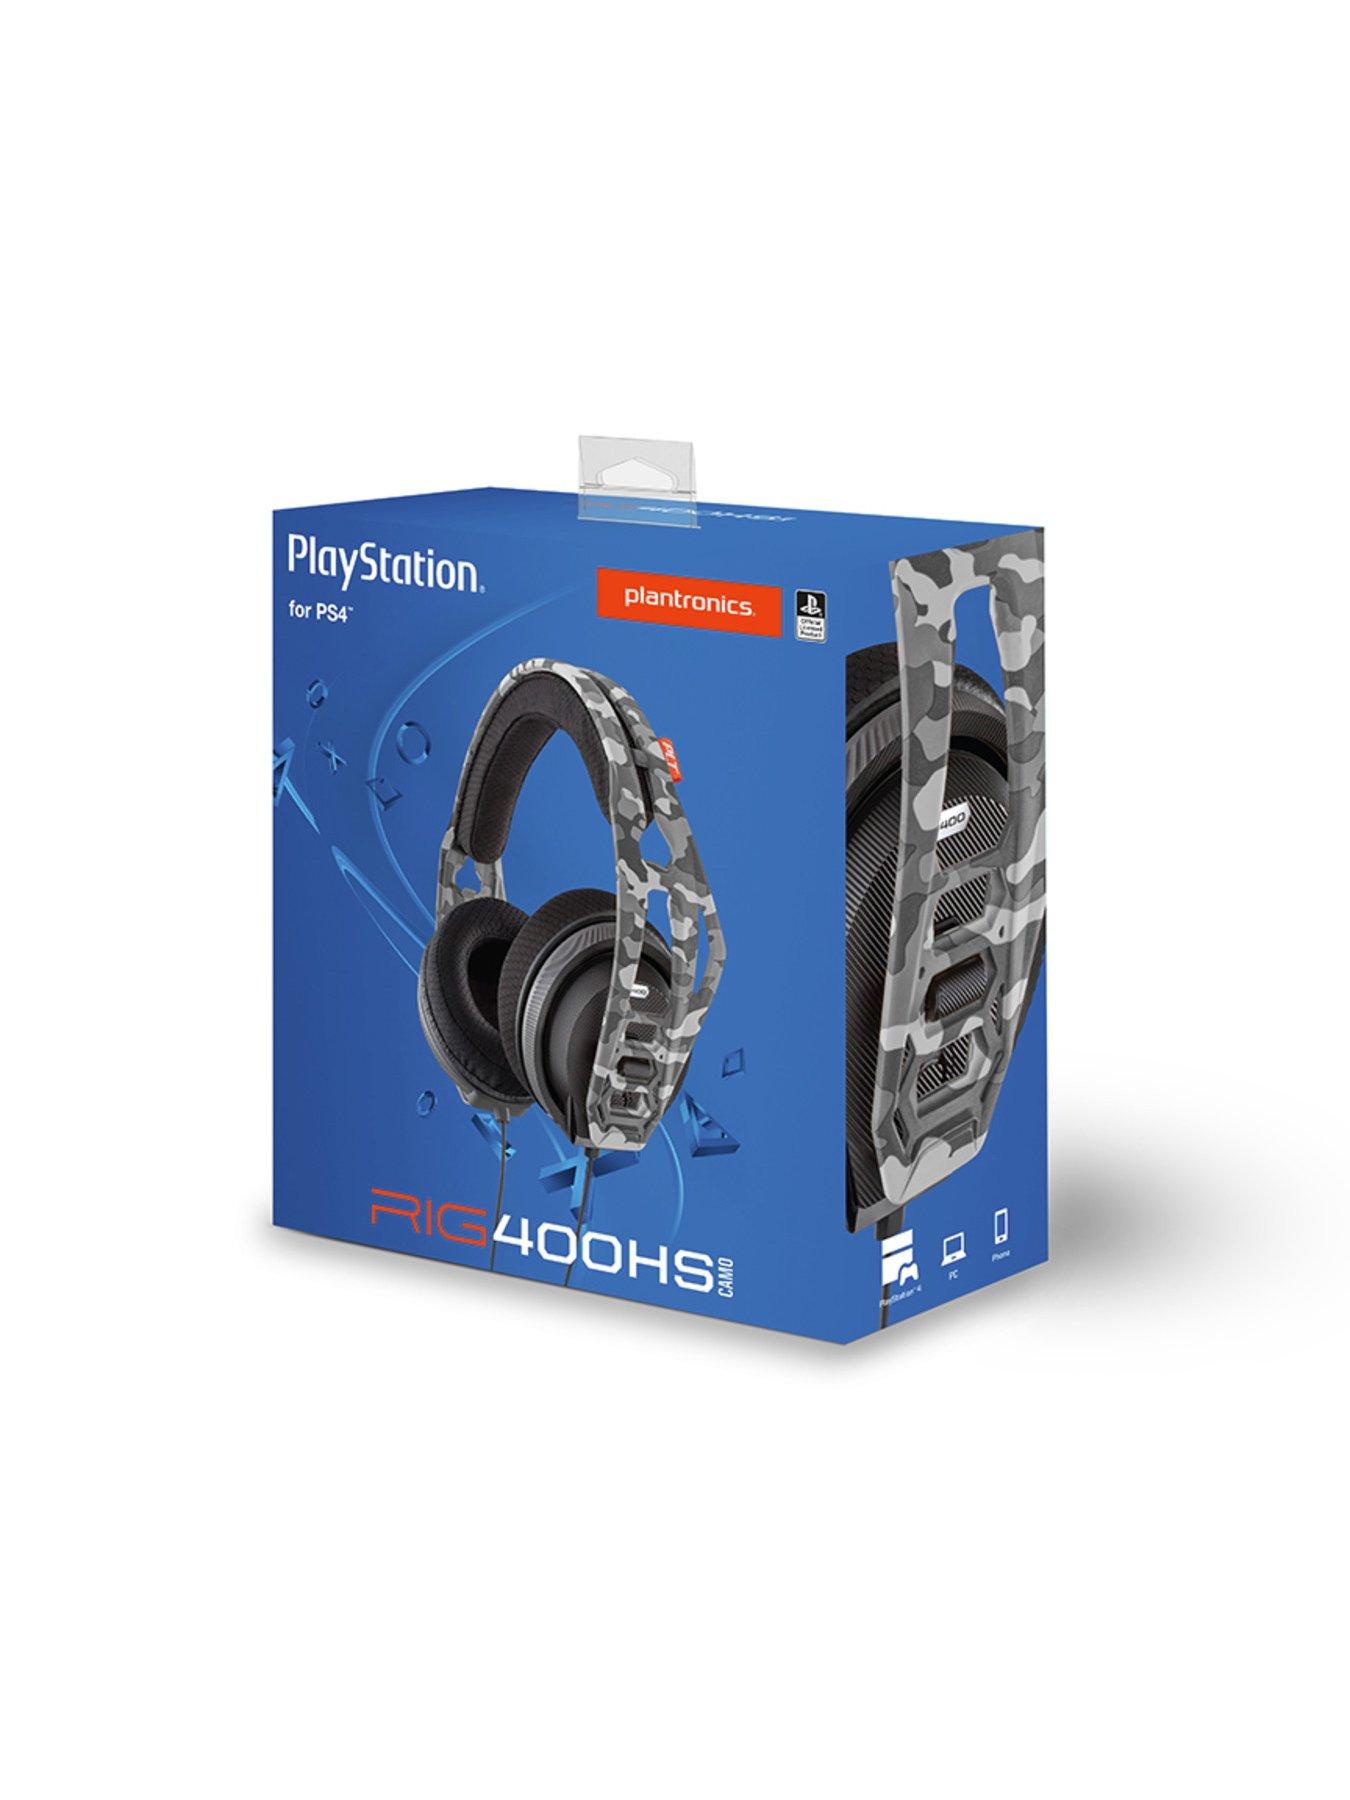 plantronics rig 400hs camo stereo gaming headset for playstation 4